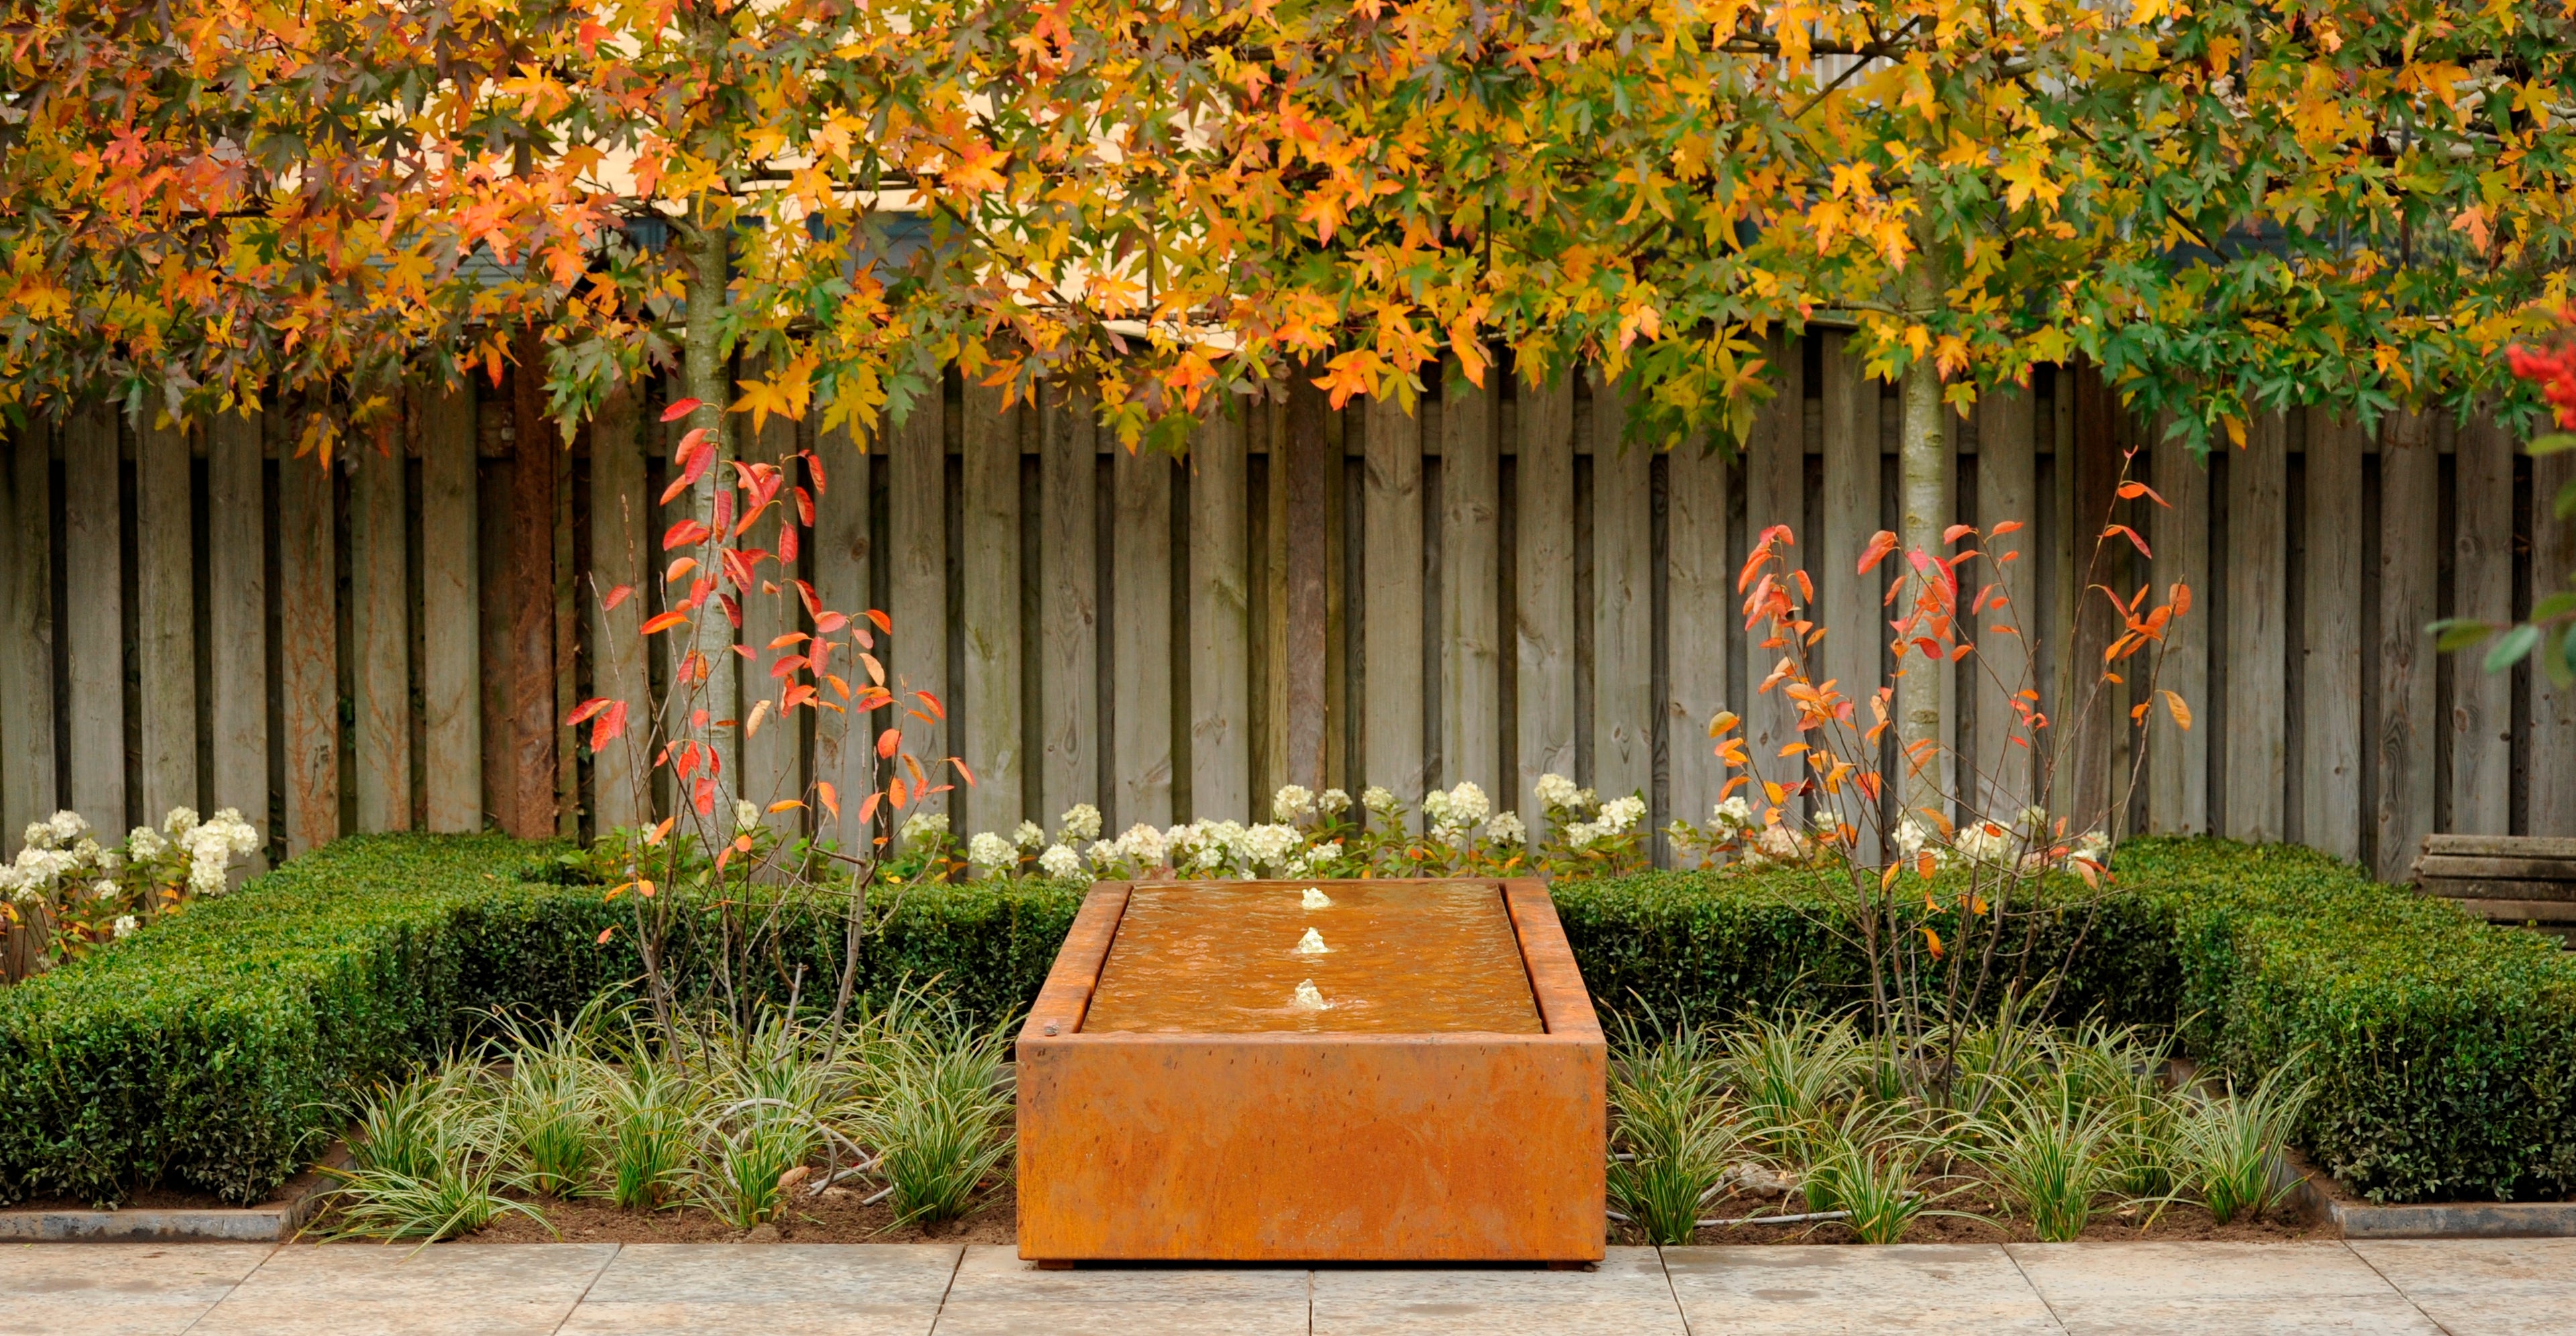 Classic Water Features: a centre piece with flowing water